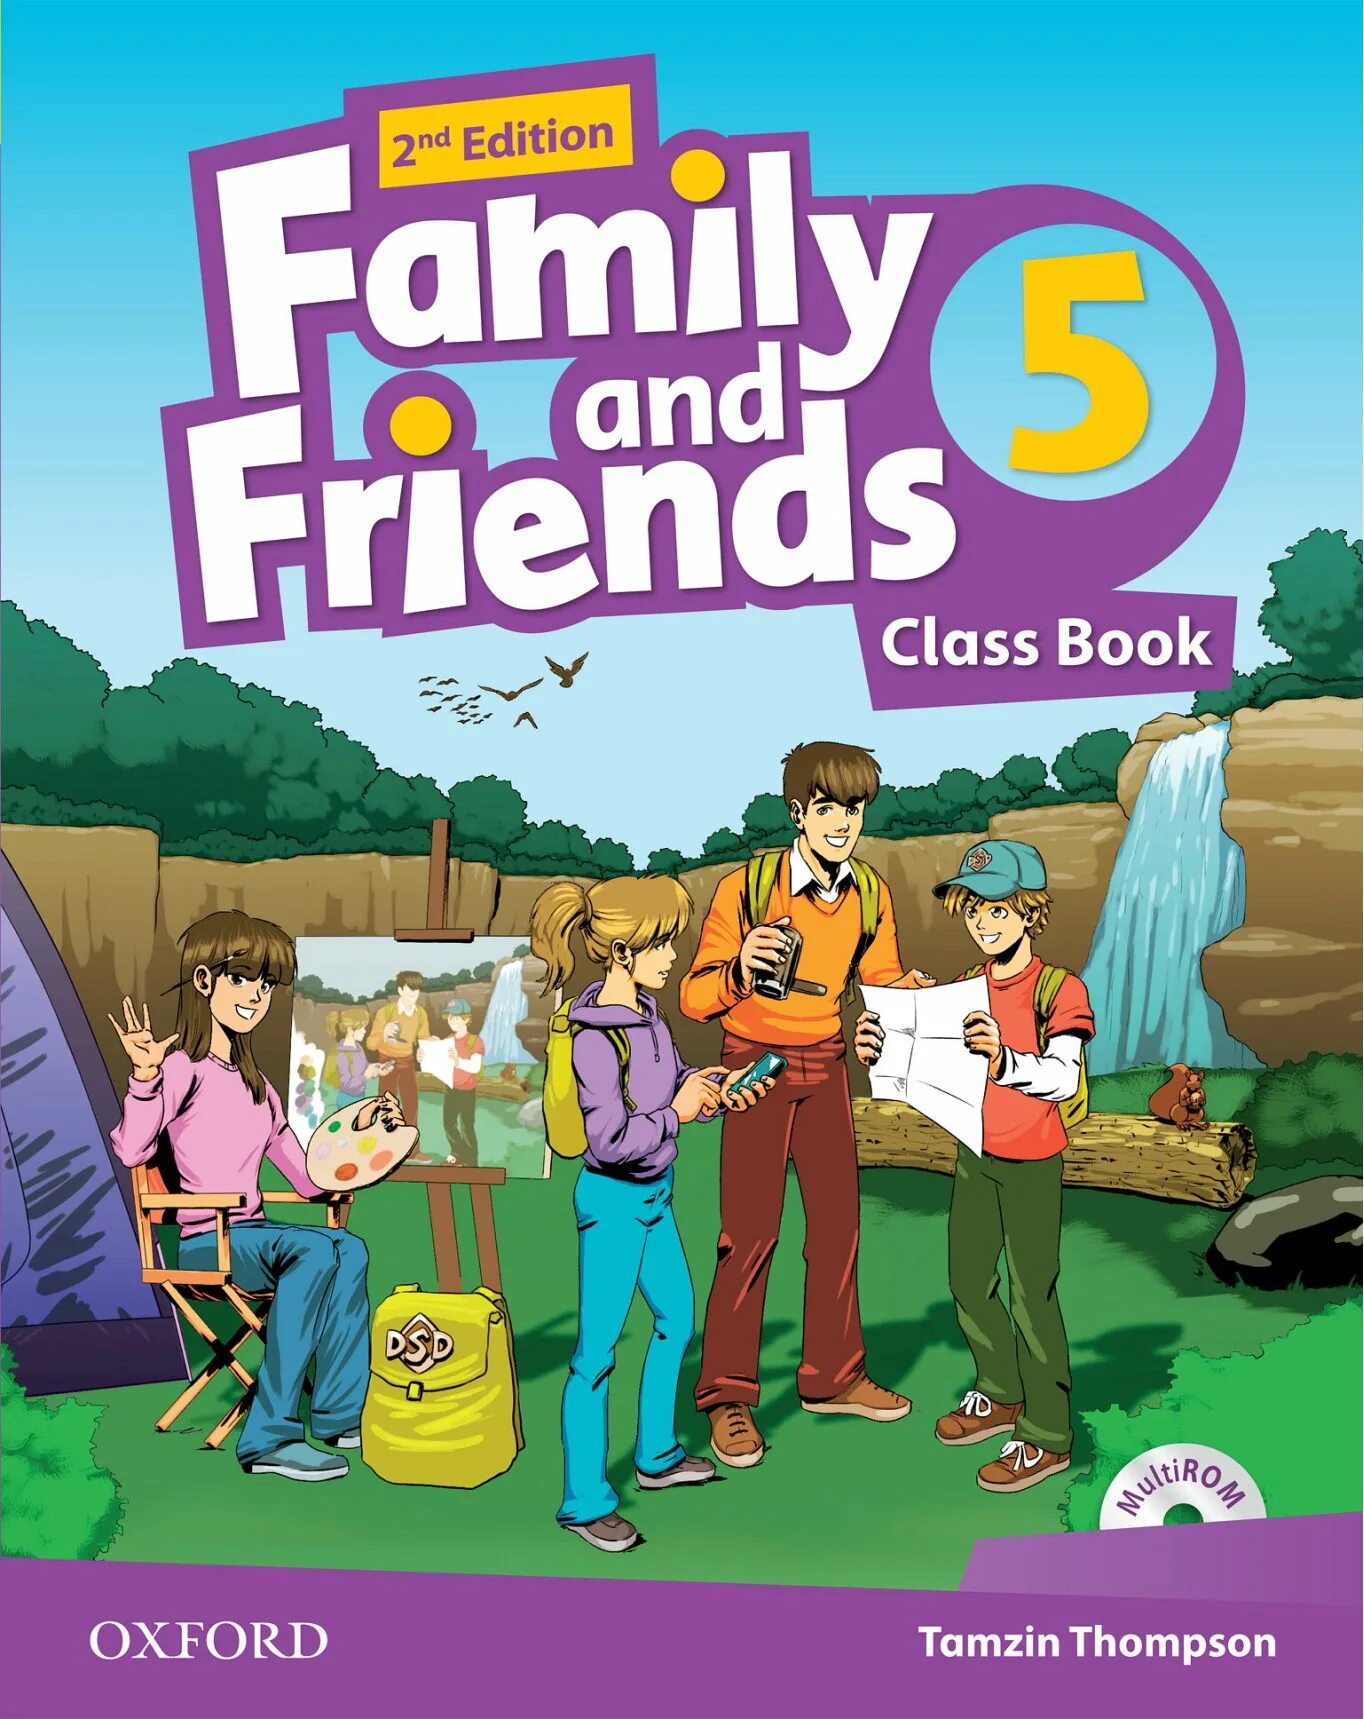 Students book 2 класс ответы. Учебник Family and friends 5. Фэмили френдс 6. \Фэмили энд френдс 2 издание. Family and friends 3 2nd Edition.